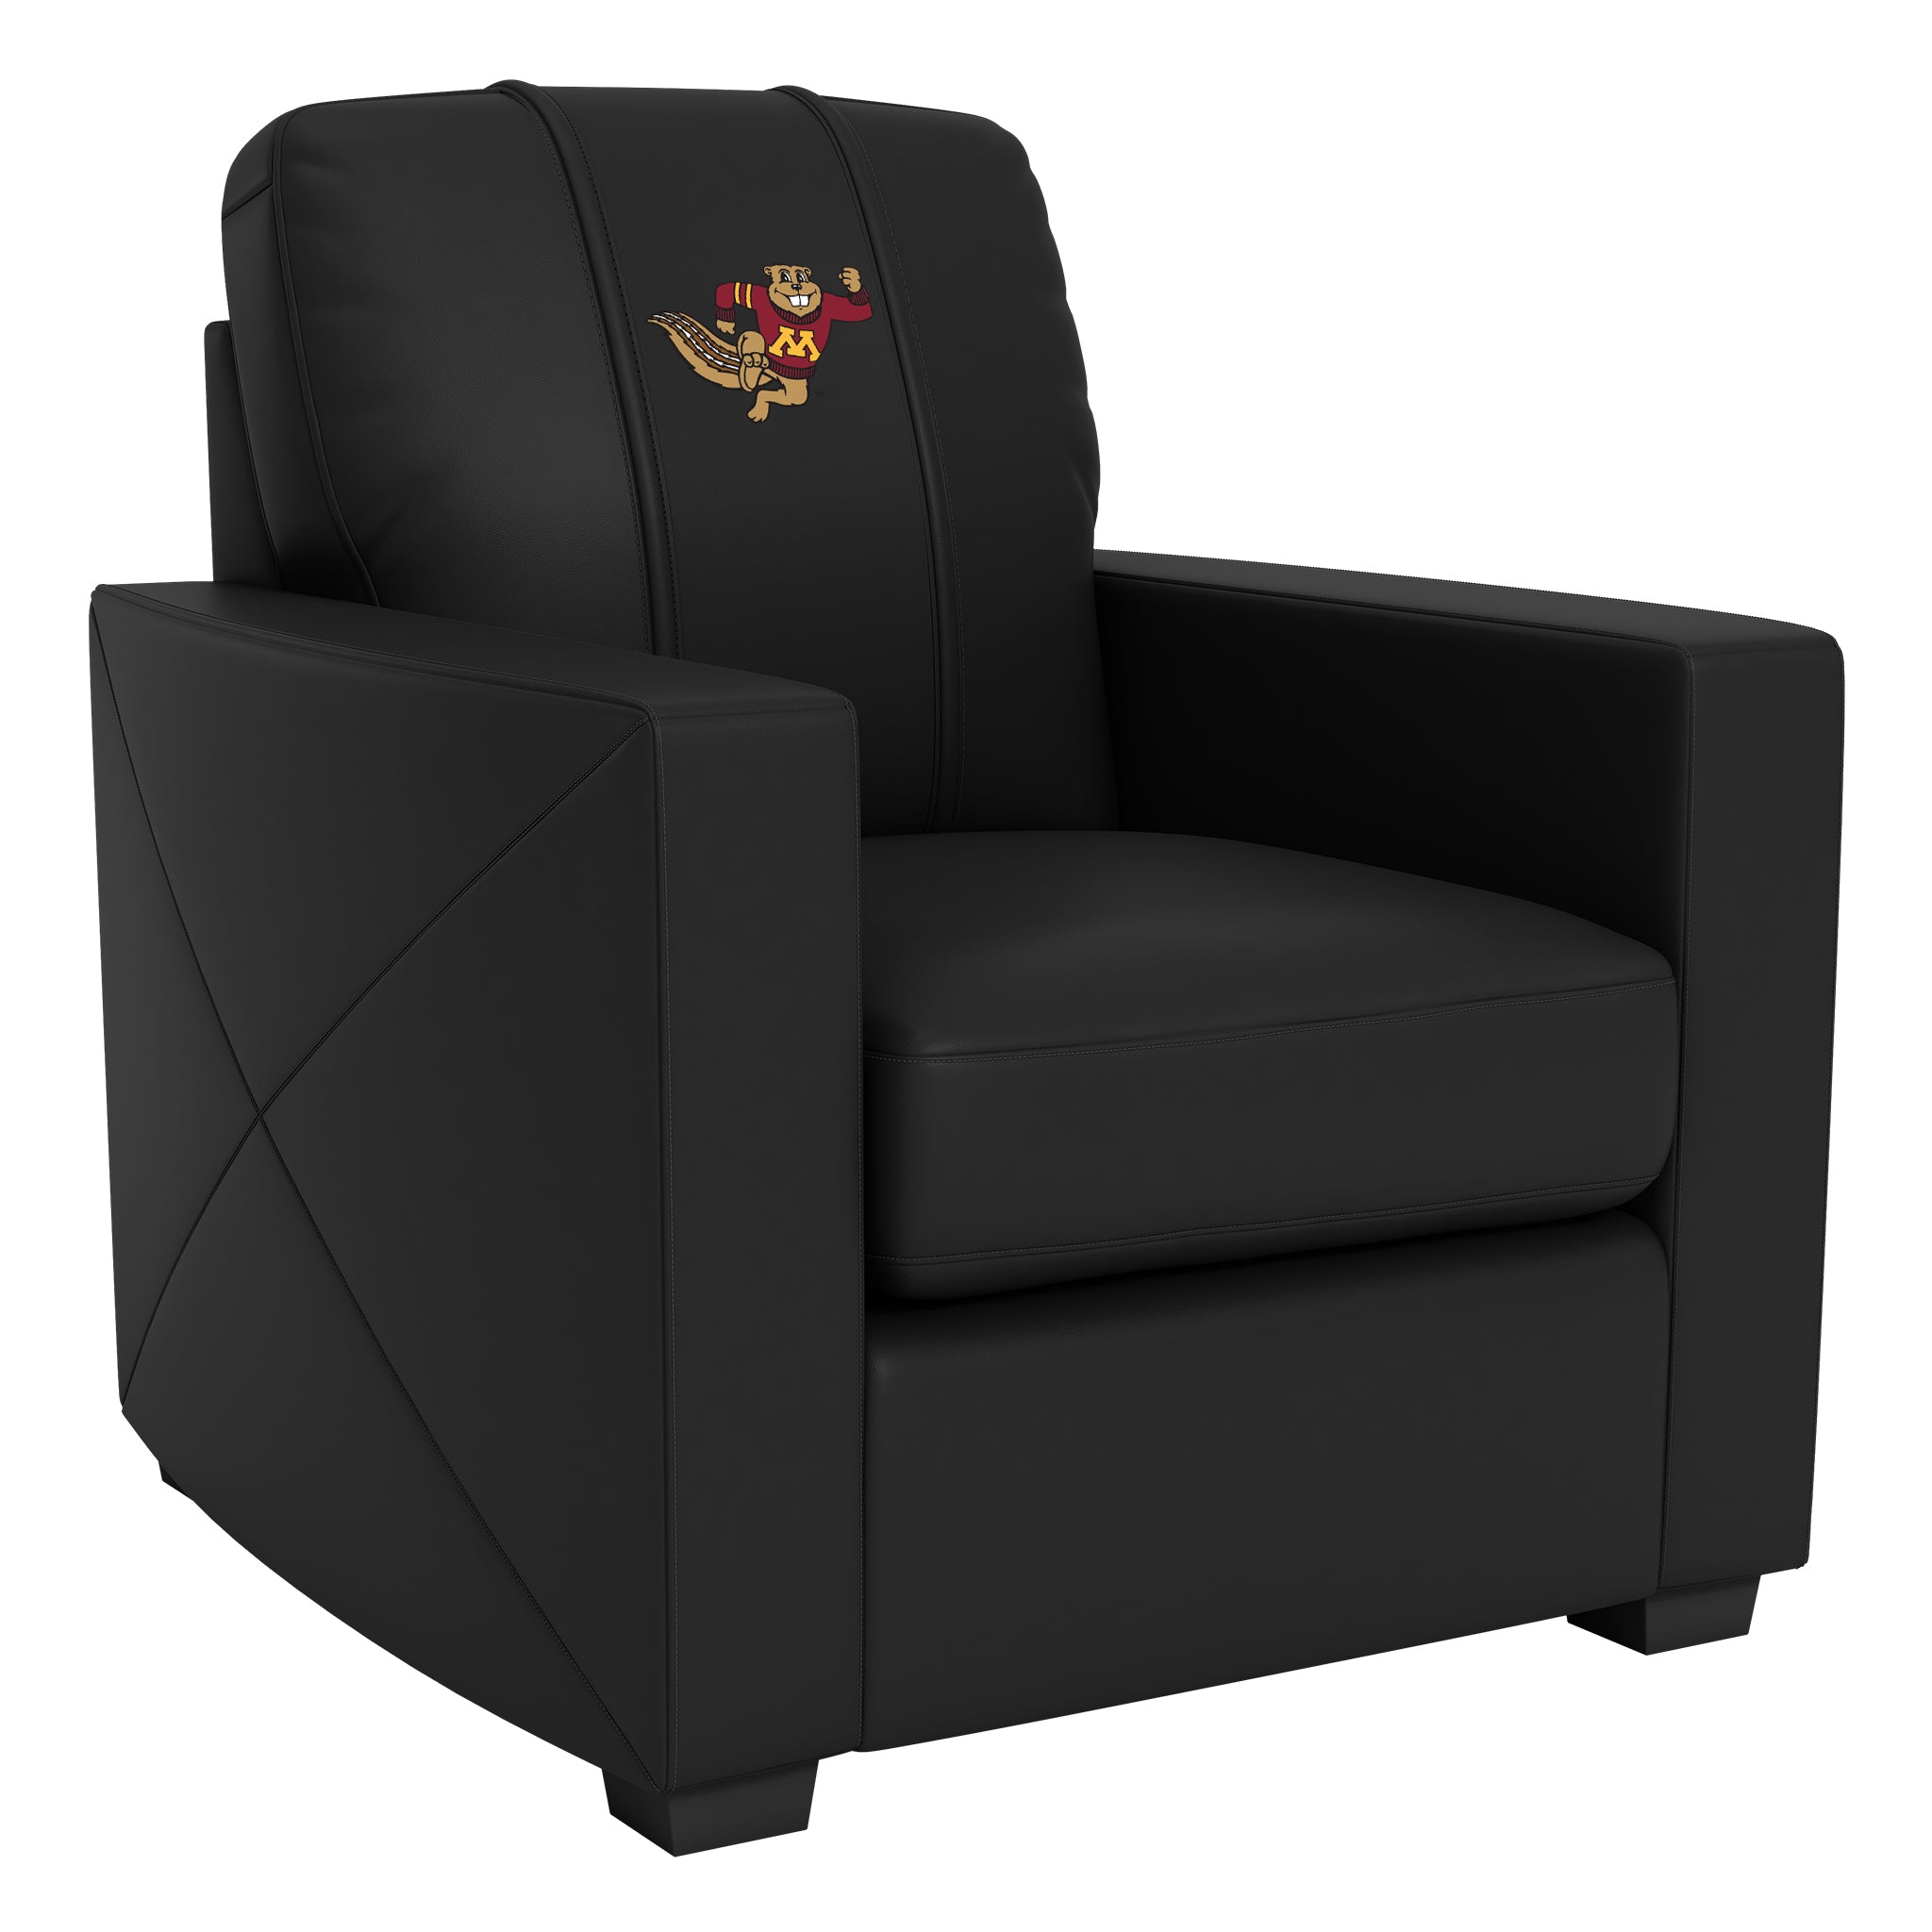 University of Minnesota Silver Club Chair with University of Minnesota Secondary Logo